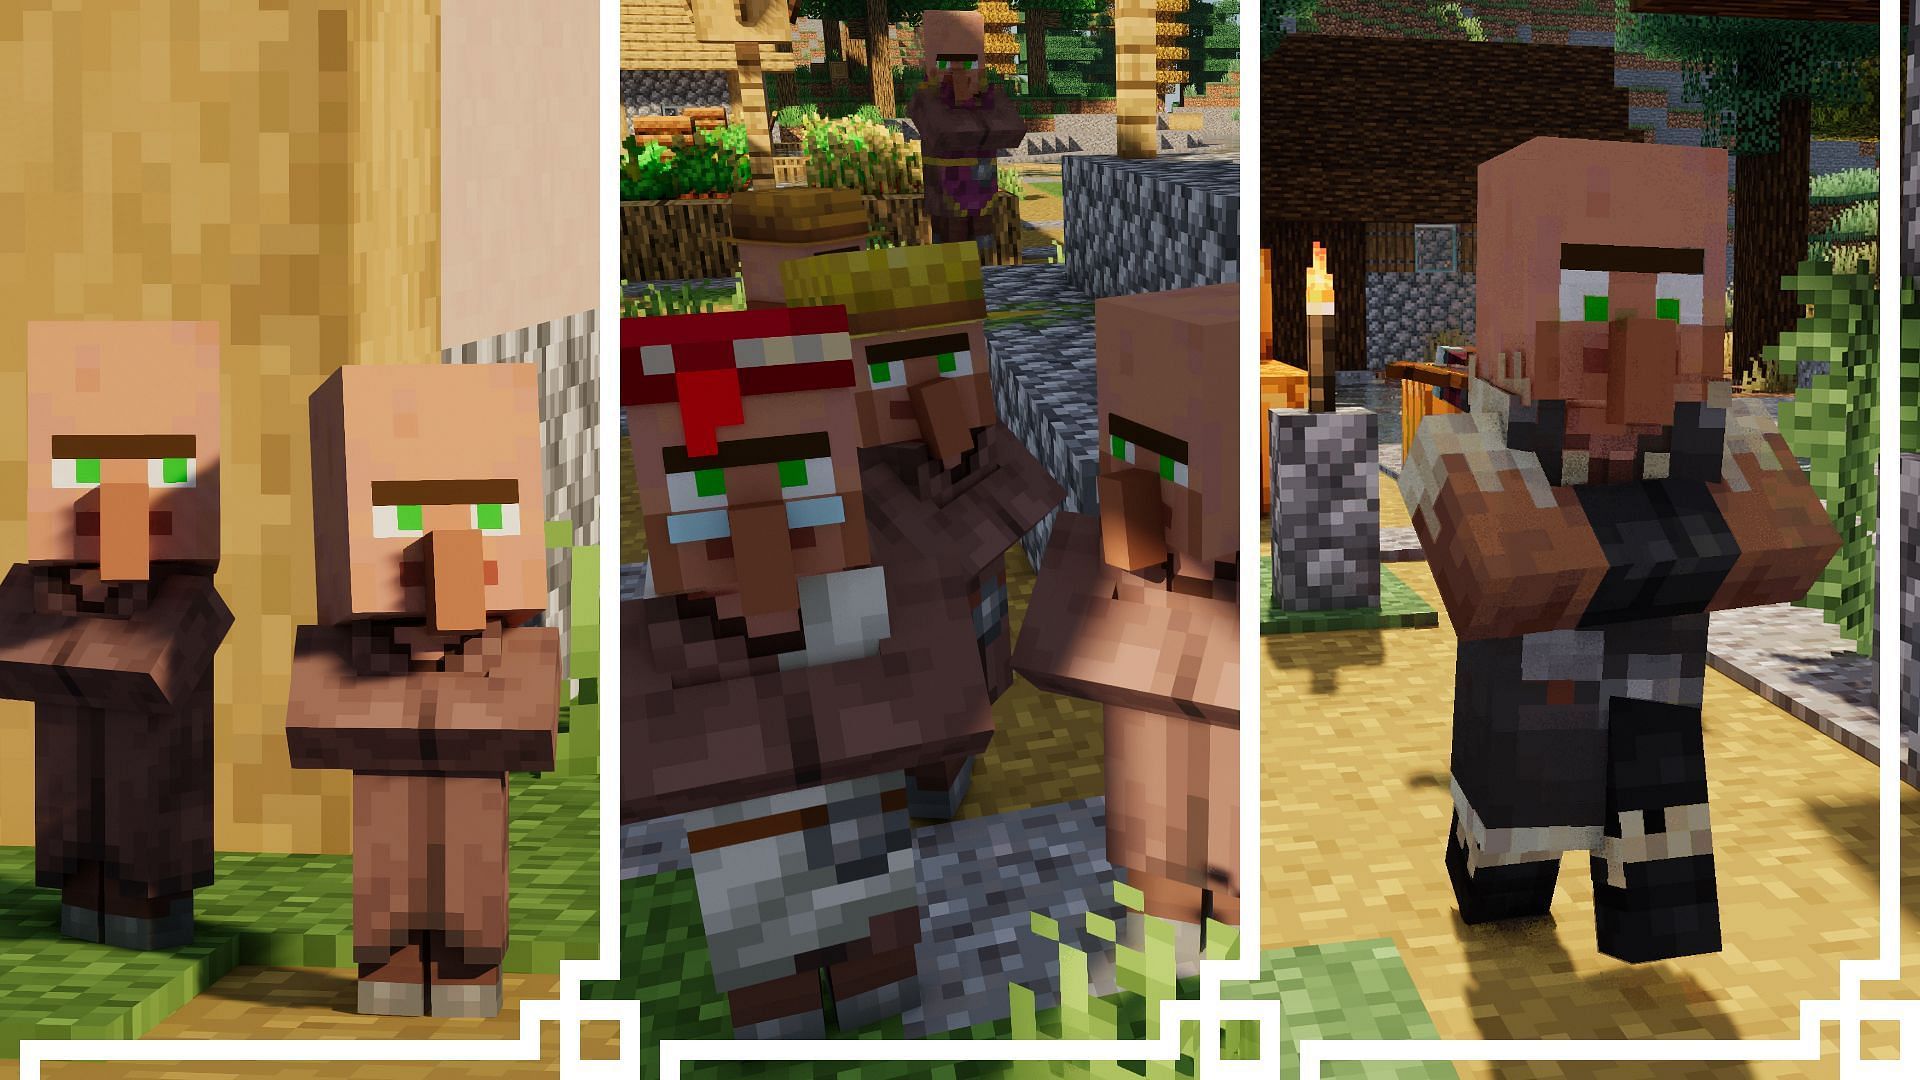 Fresh Animation can breathe new life into Minecraft 1.19 mobs (Image via CurseForge)